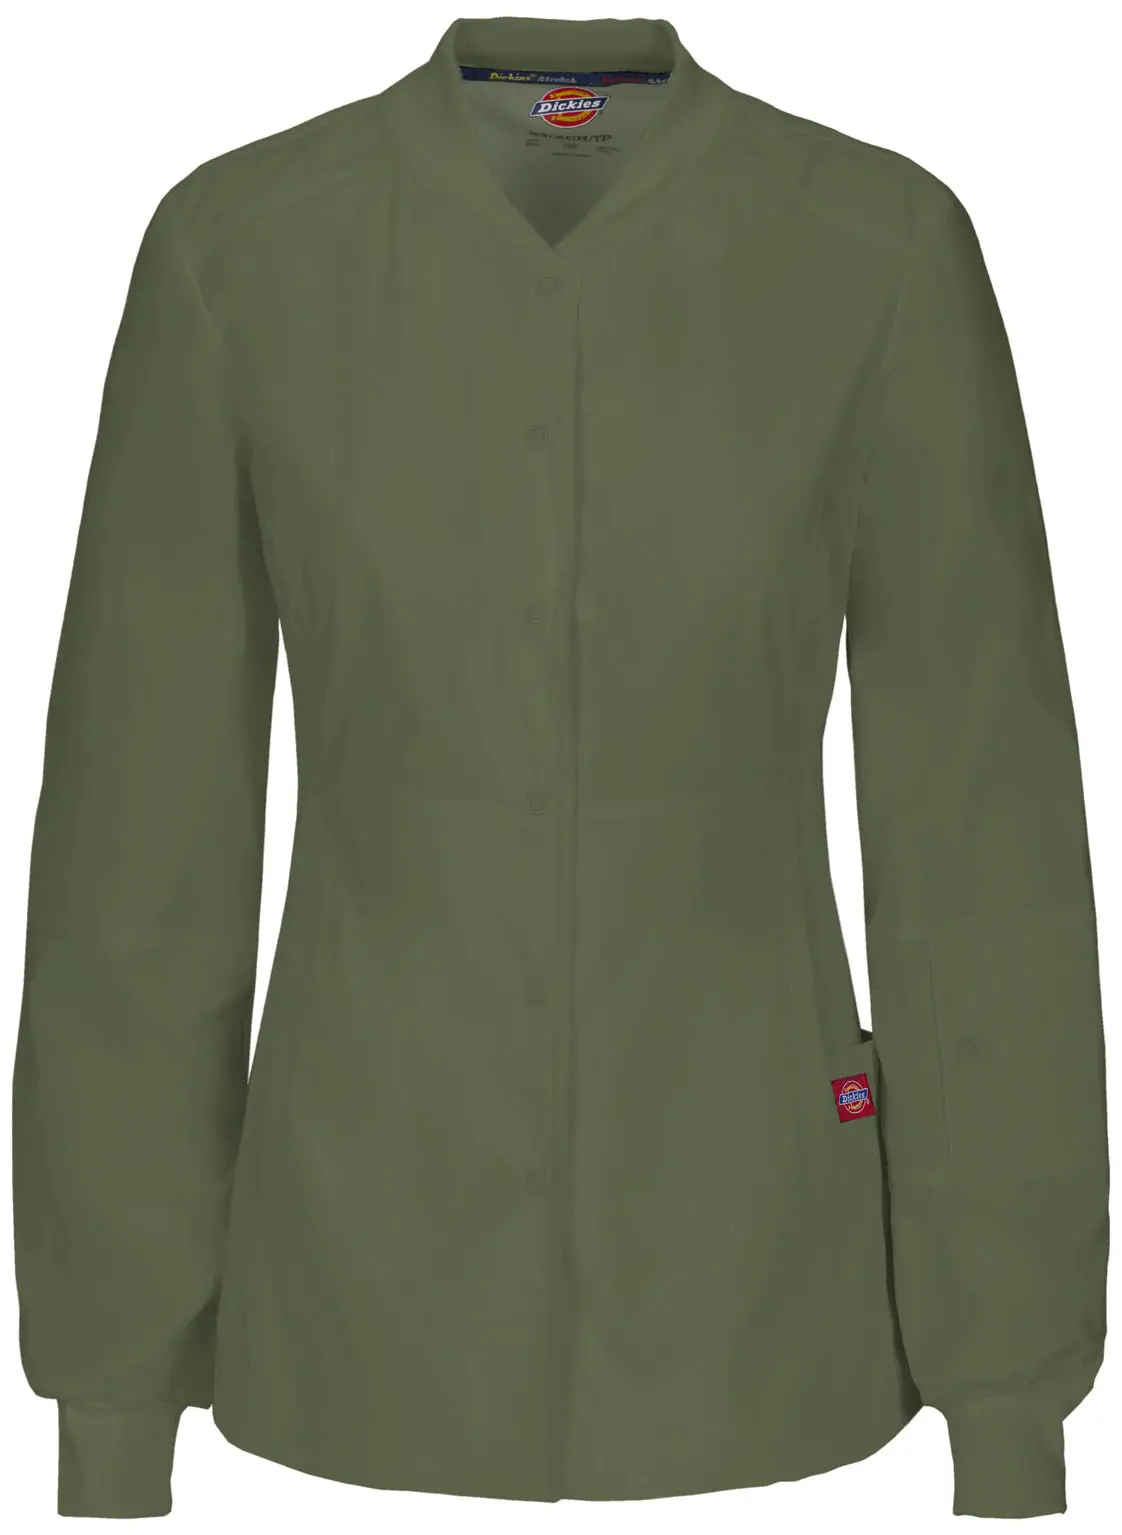 Snap Front Warm-up Jacket